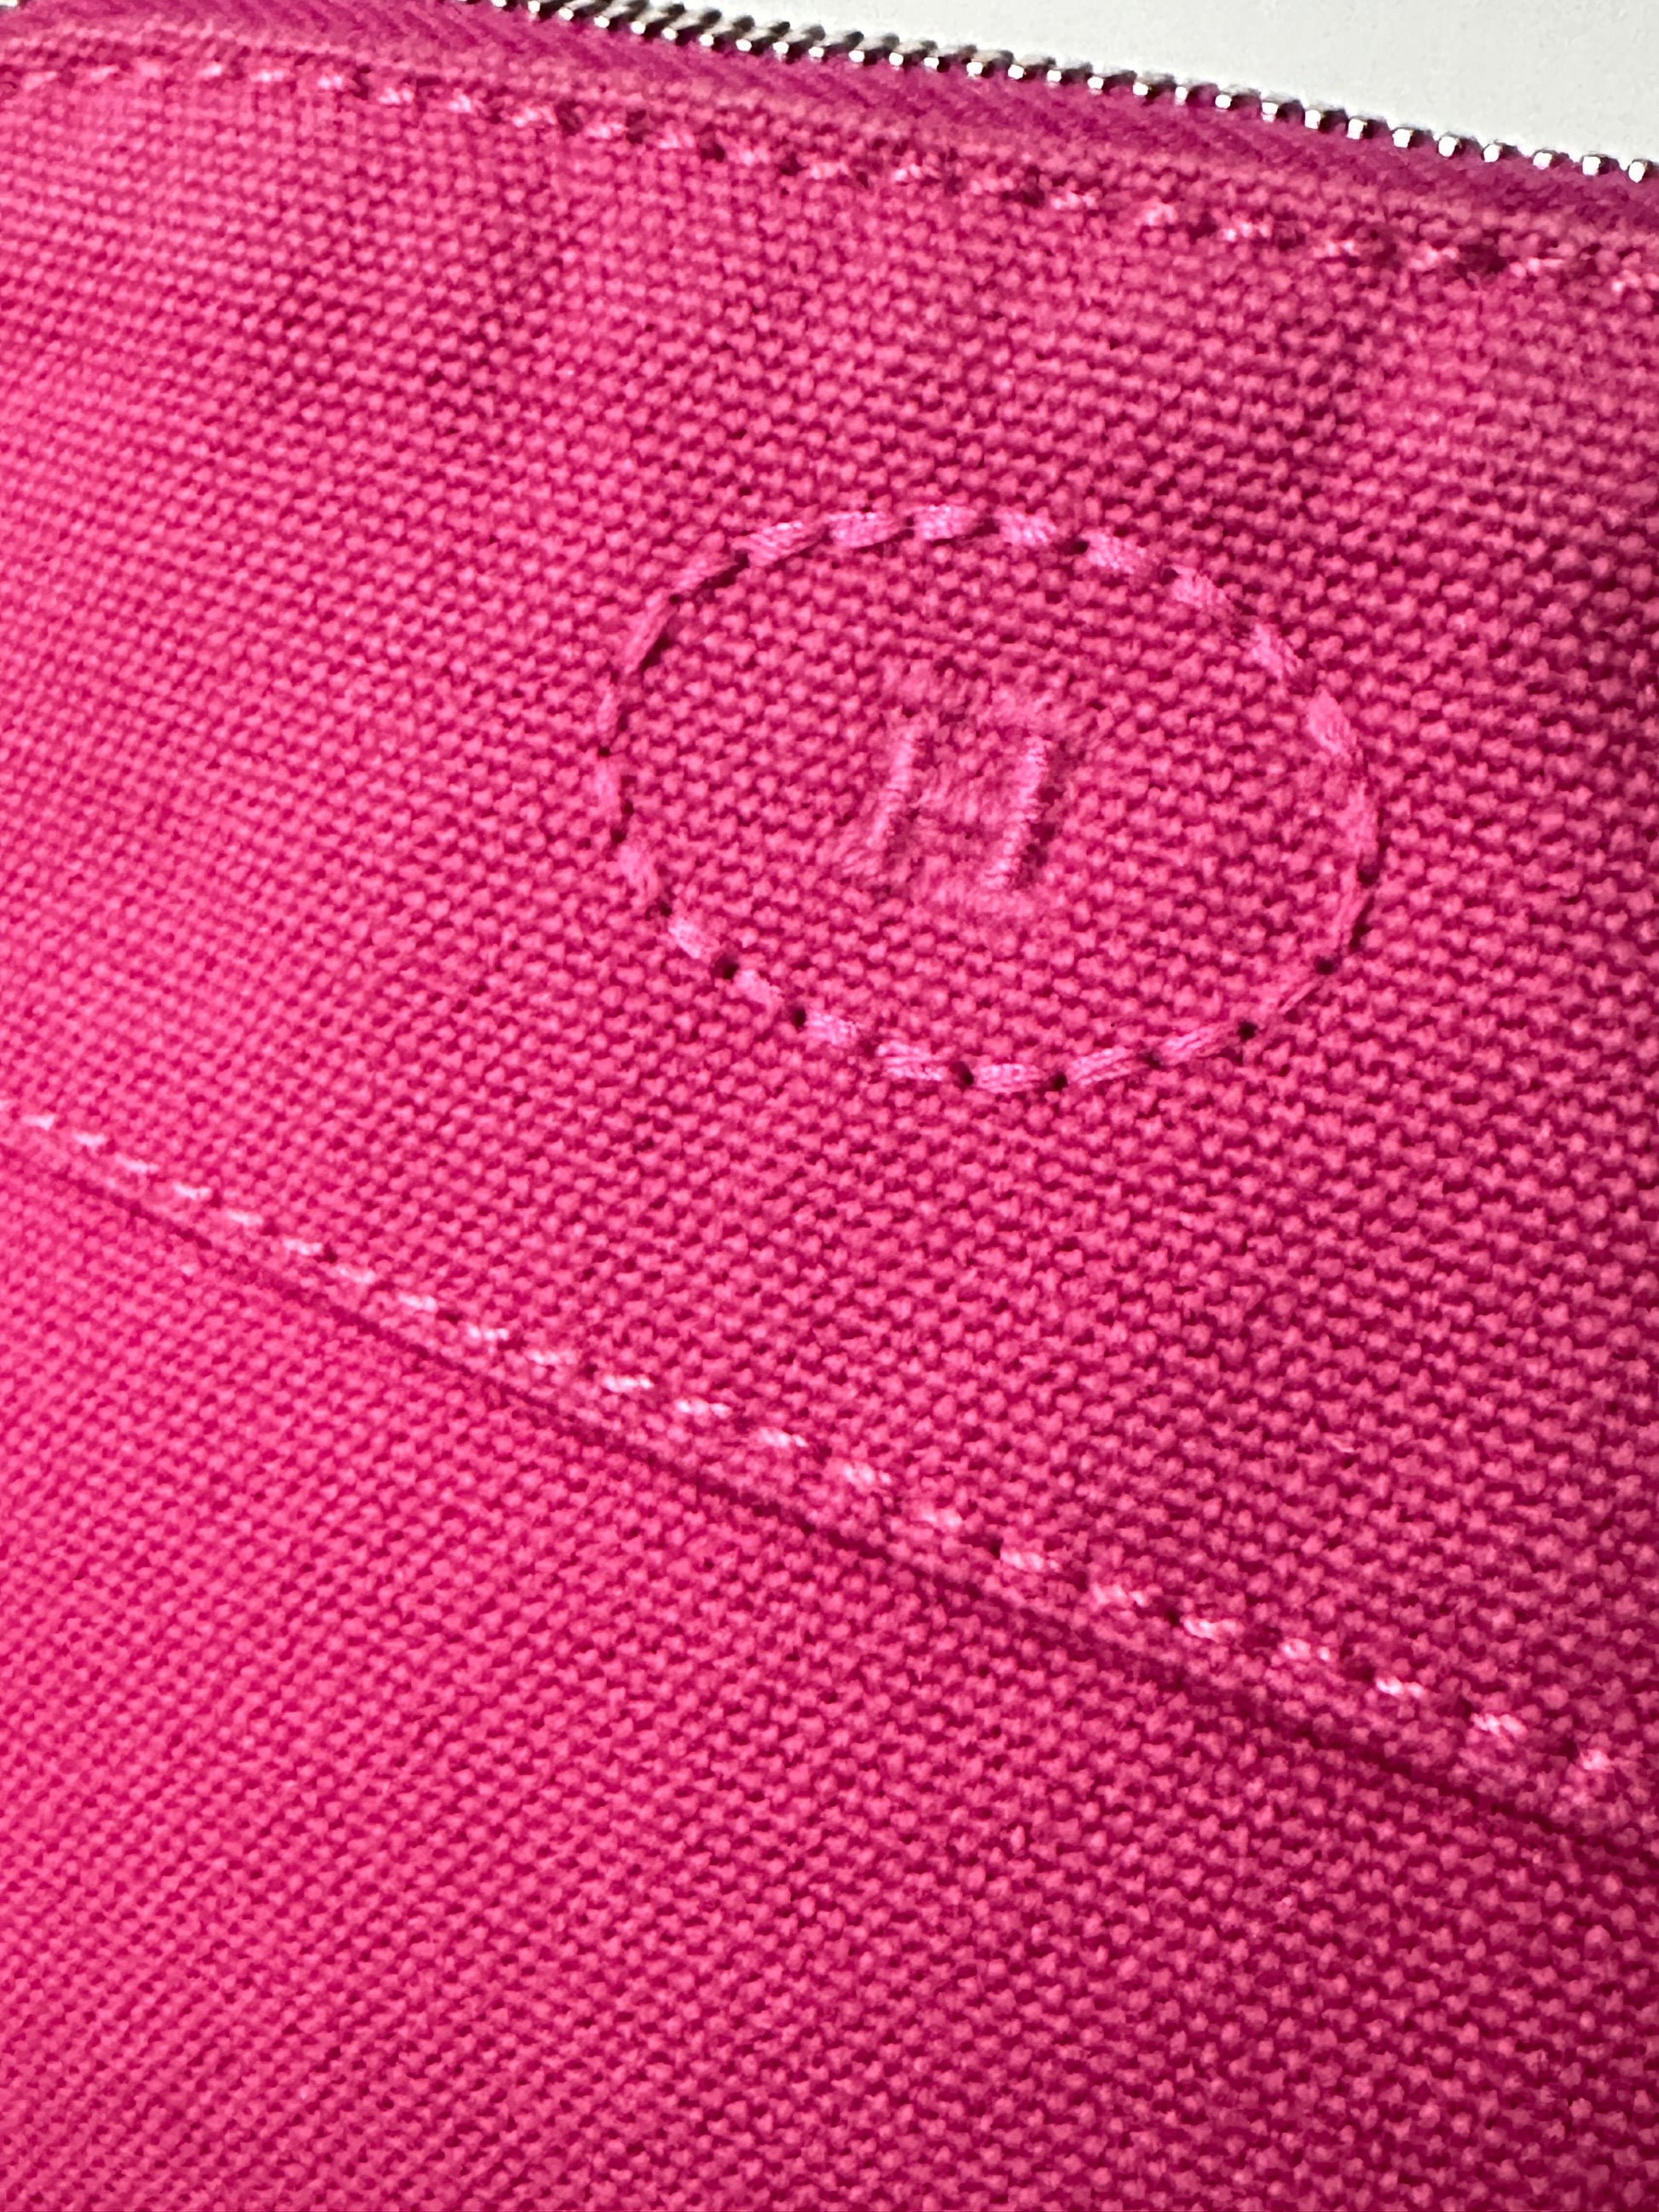 HERMES VINTAGE 100% Authentic Genuine Canvas Bolide Makeup Pouch Case Bag, Bright Pink, Great Condition